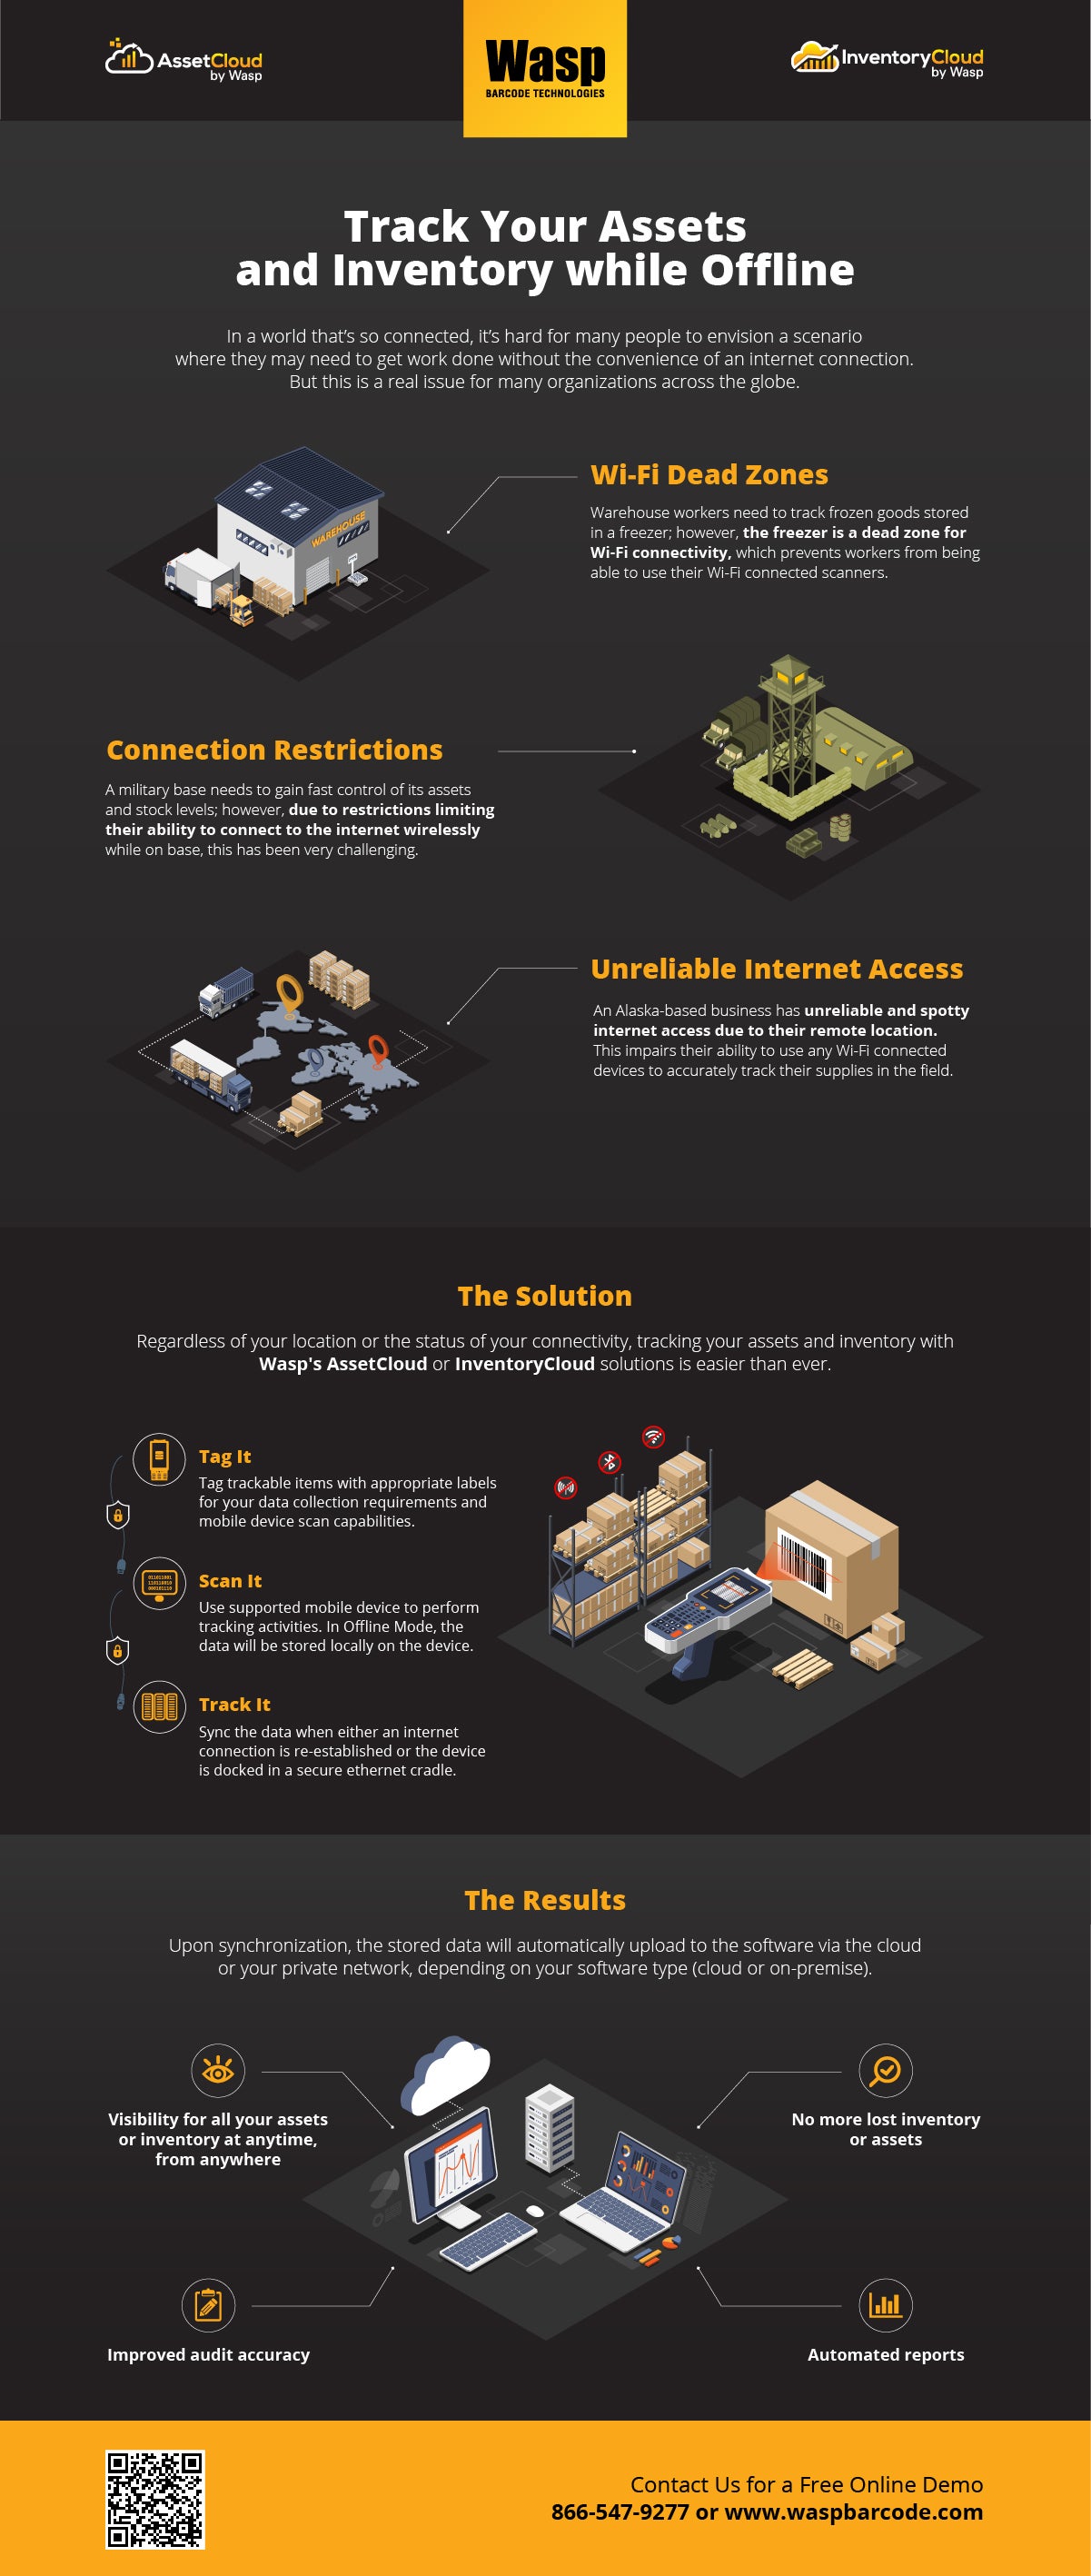 How to Track Assets and Inventory while Offline Infographic